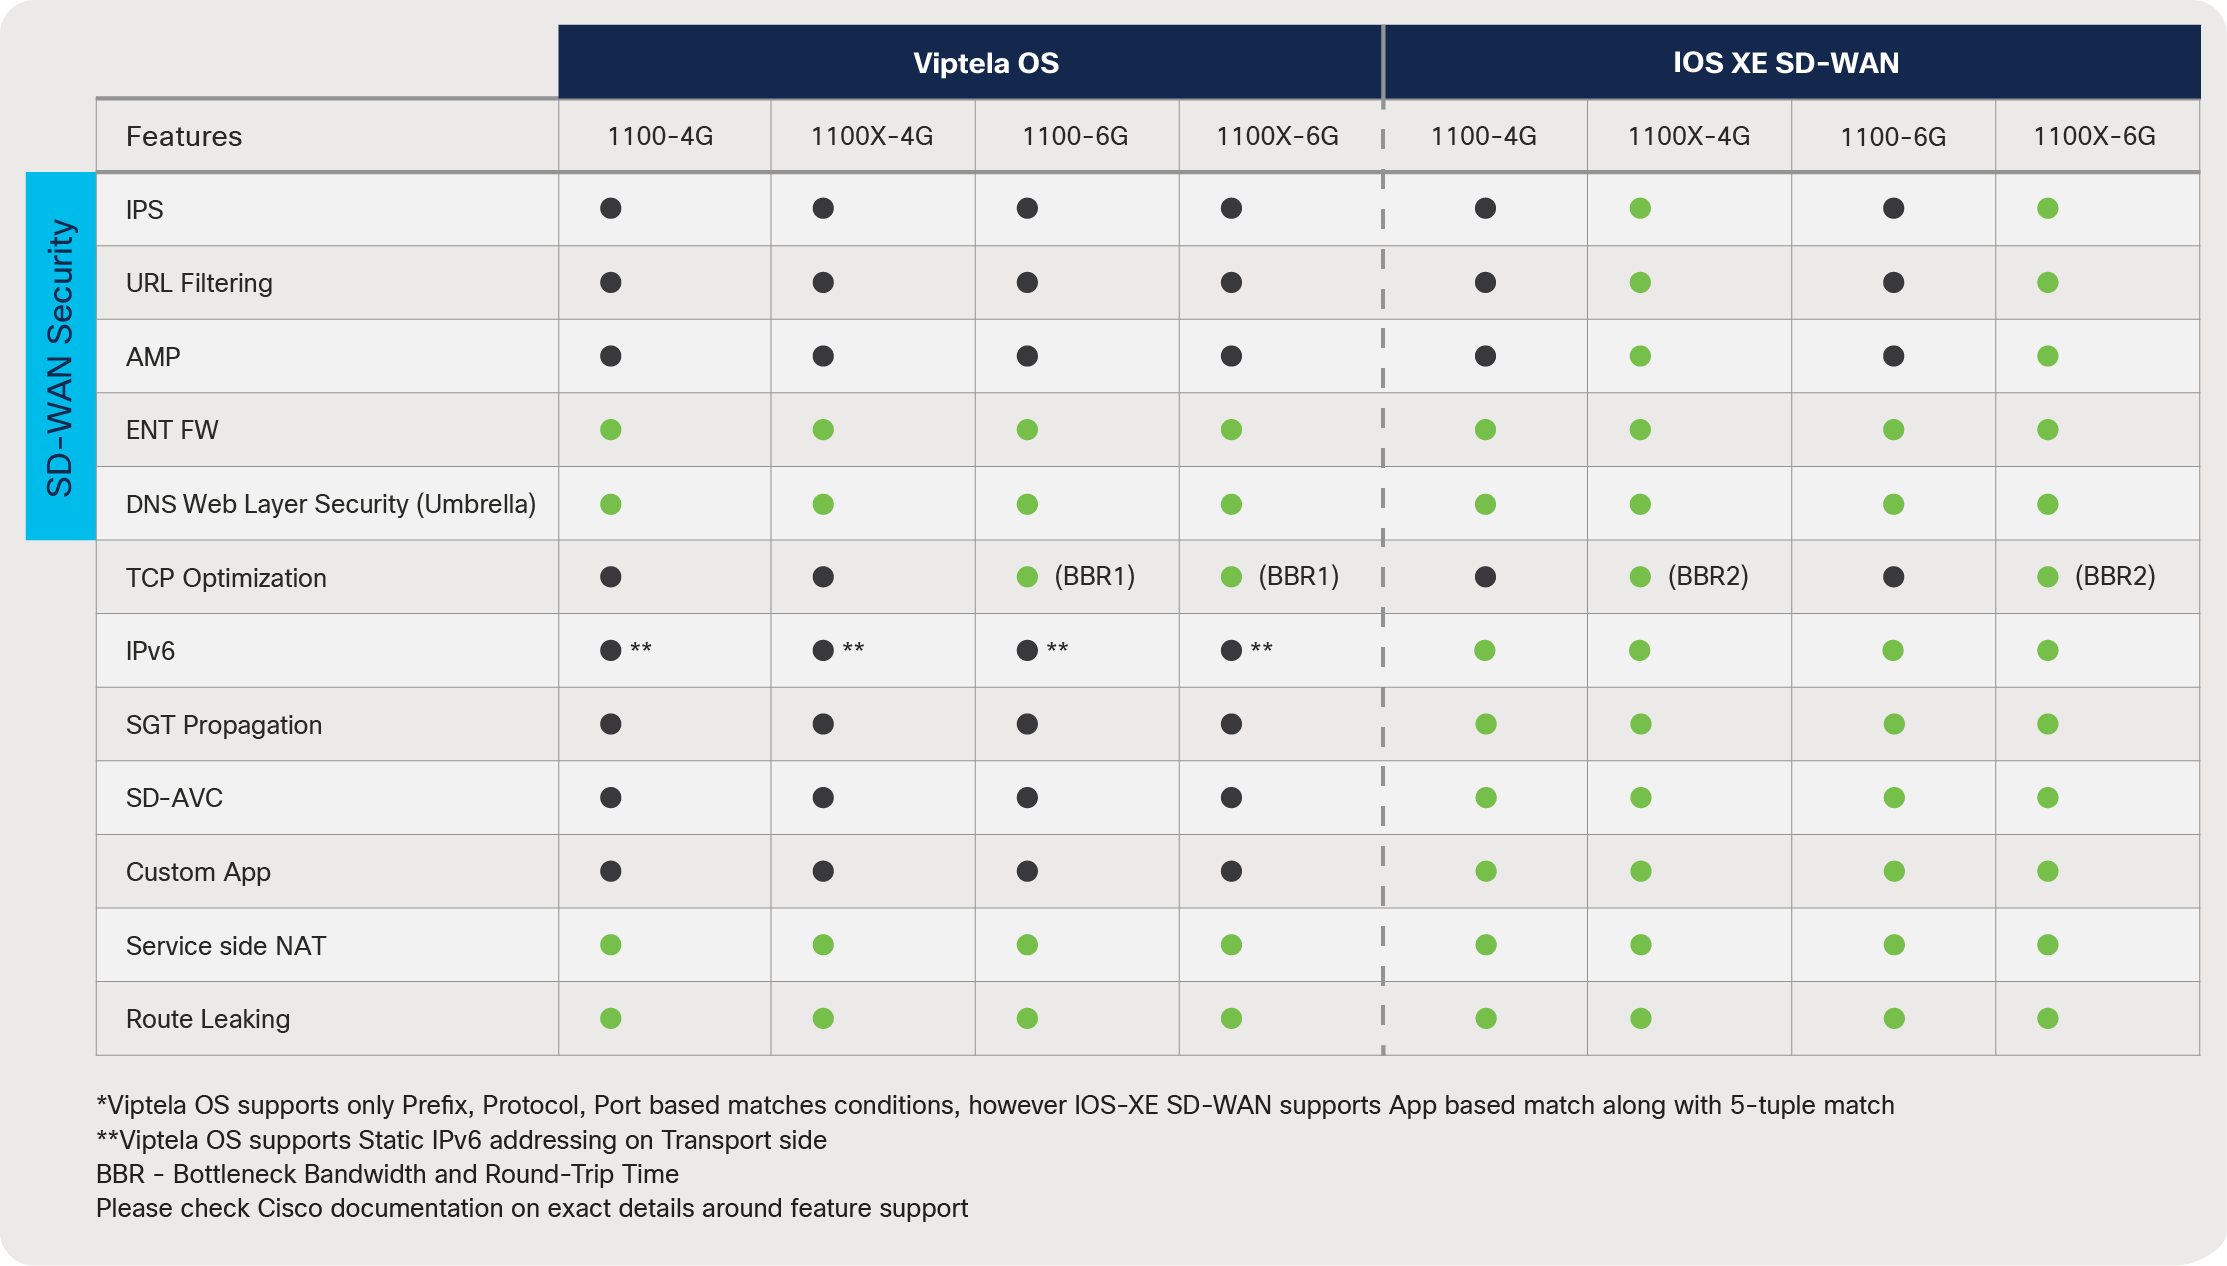 Comparison of Cisco IOS XE SD-WAN and Viptela OS for the ISR 1100 and ISR 1100X Series branch platforms